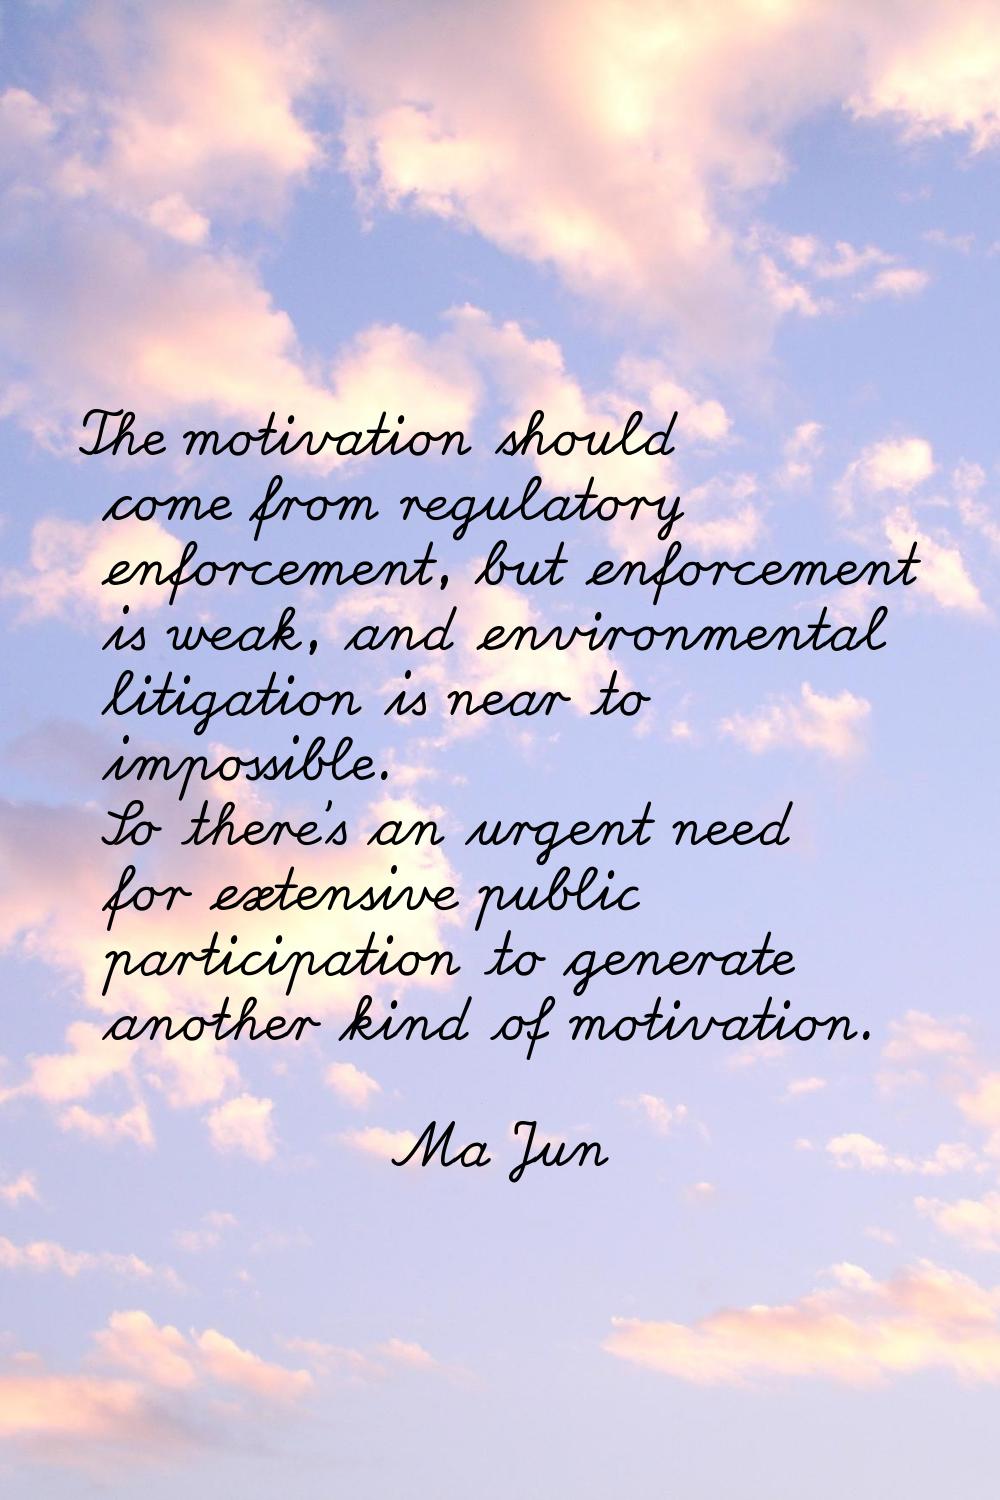 The motivation should come from regulatory enforcement, but enforcement is weak, and environmental 